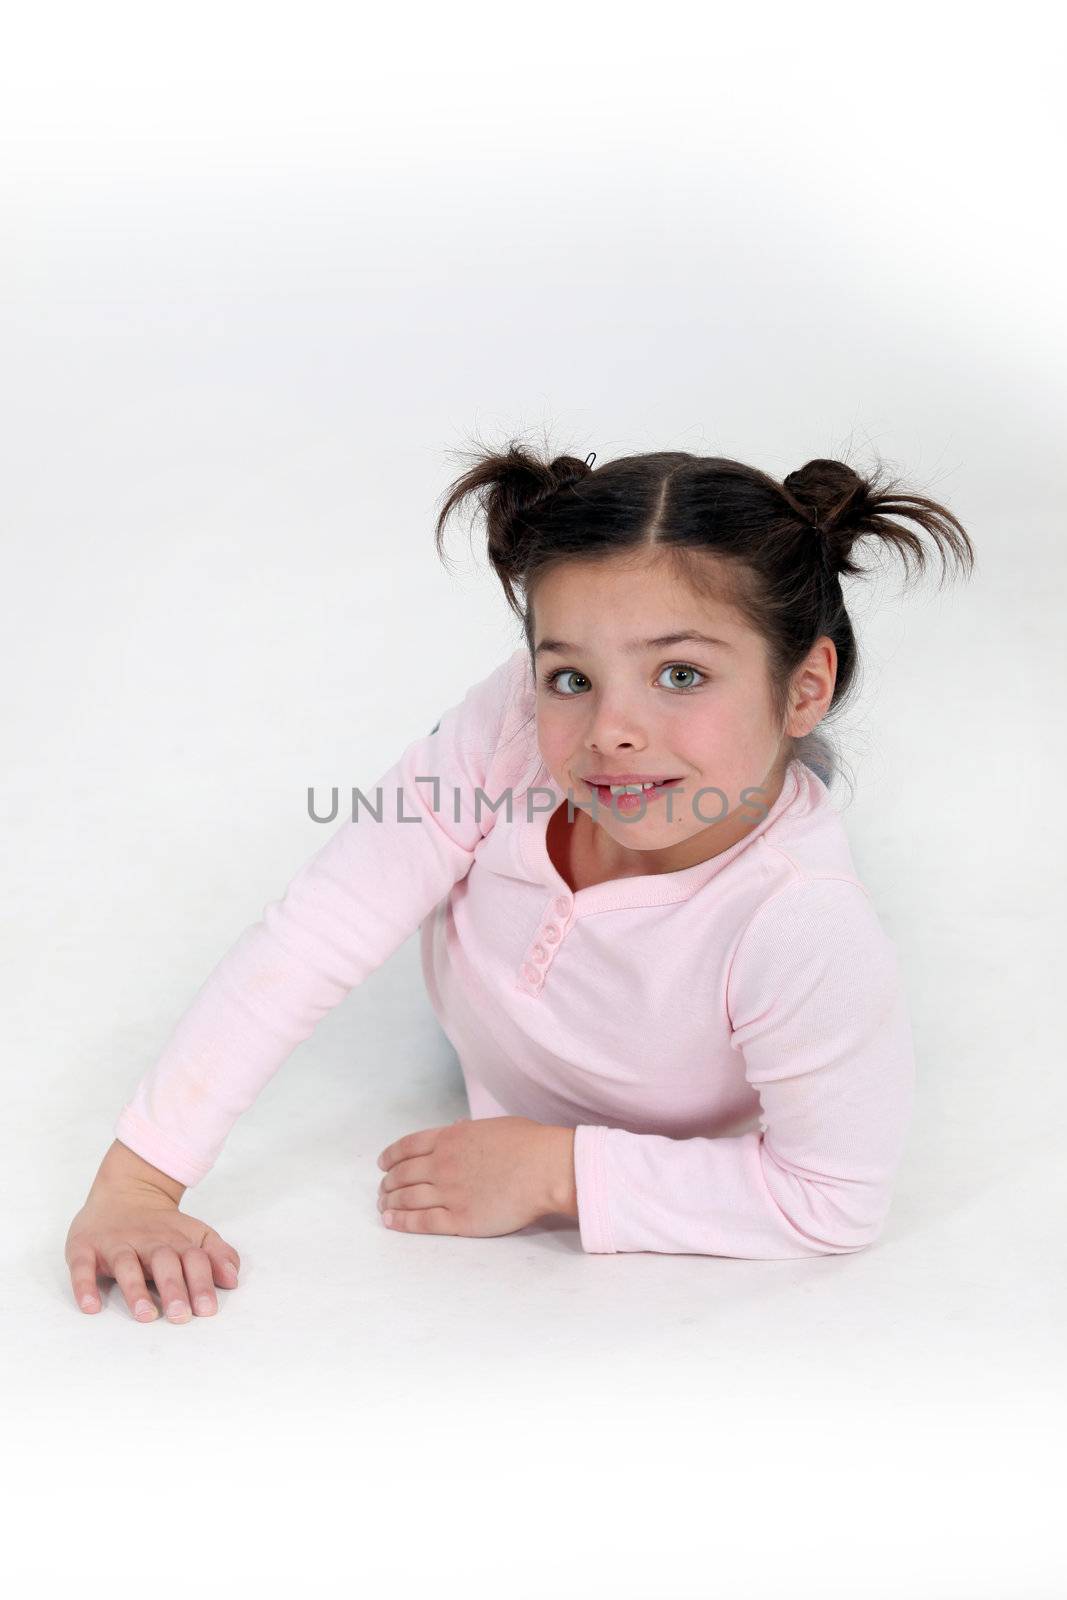 Little girl on fashion shoot by phovoir